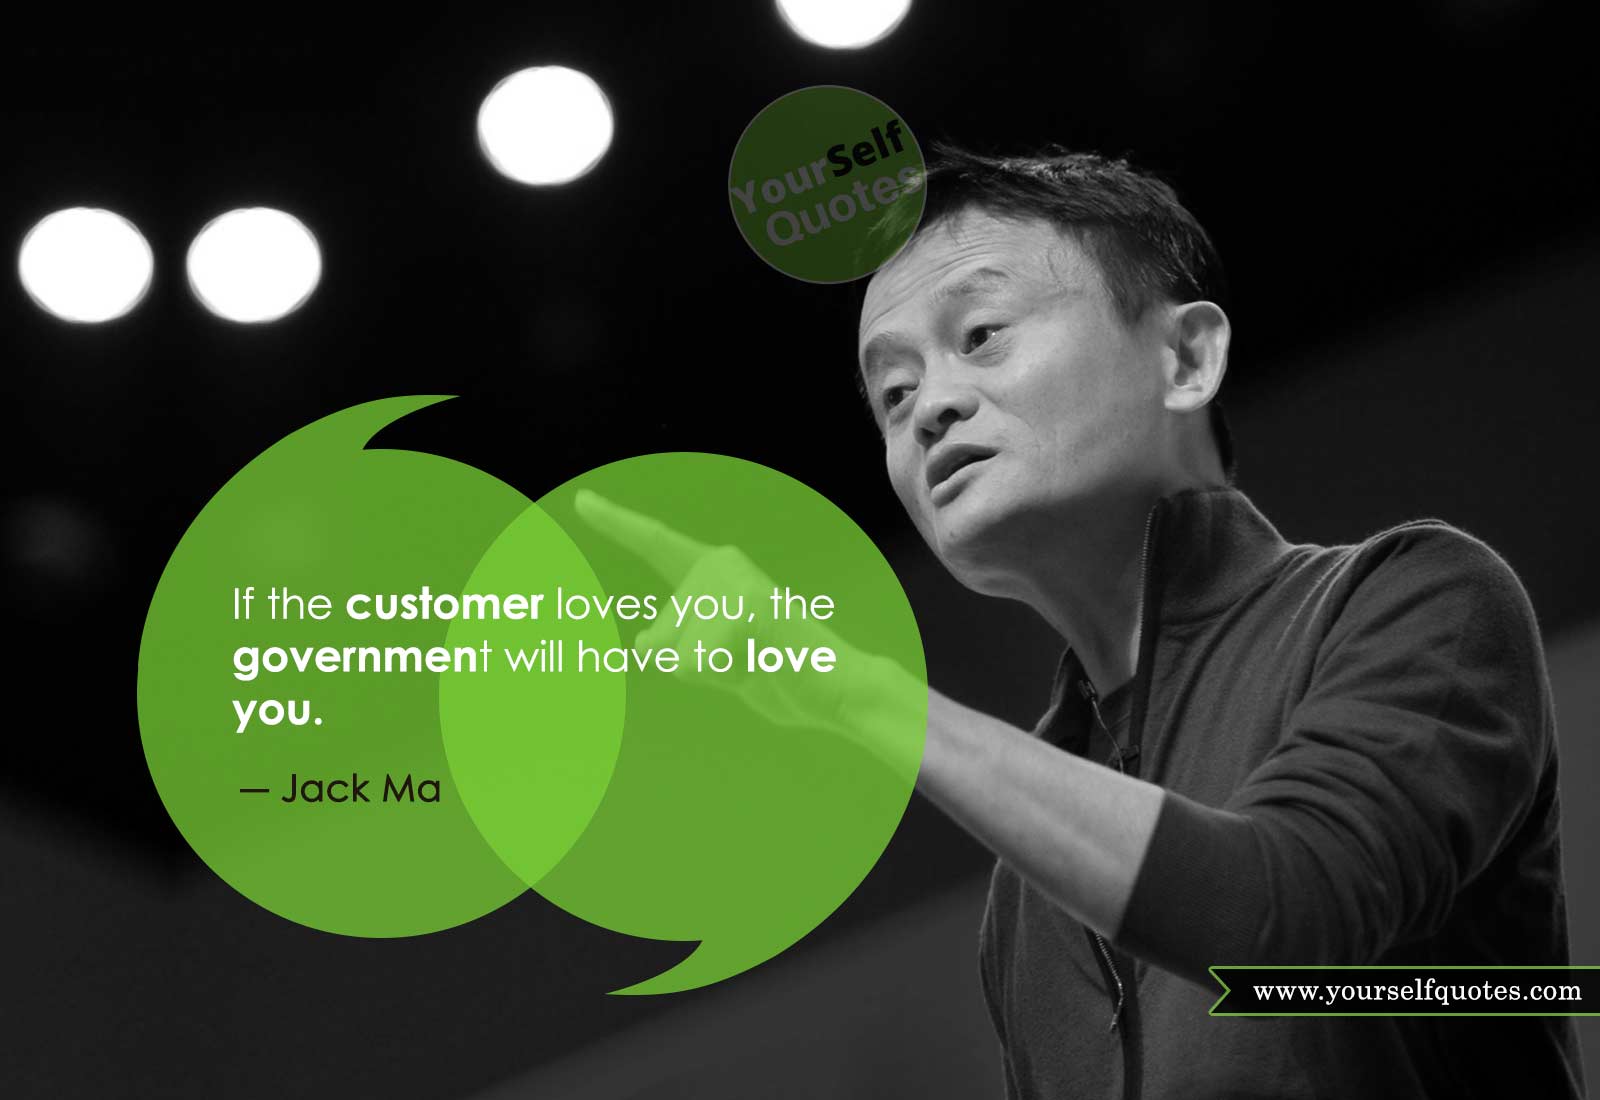 Best Jack Ma Quotes